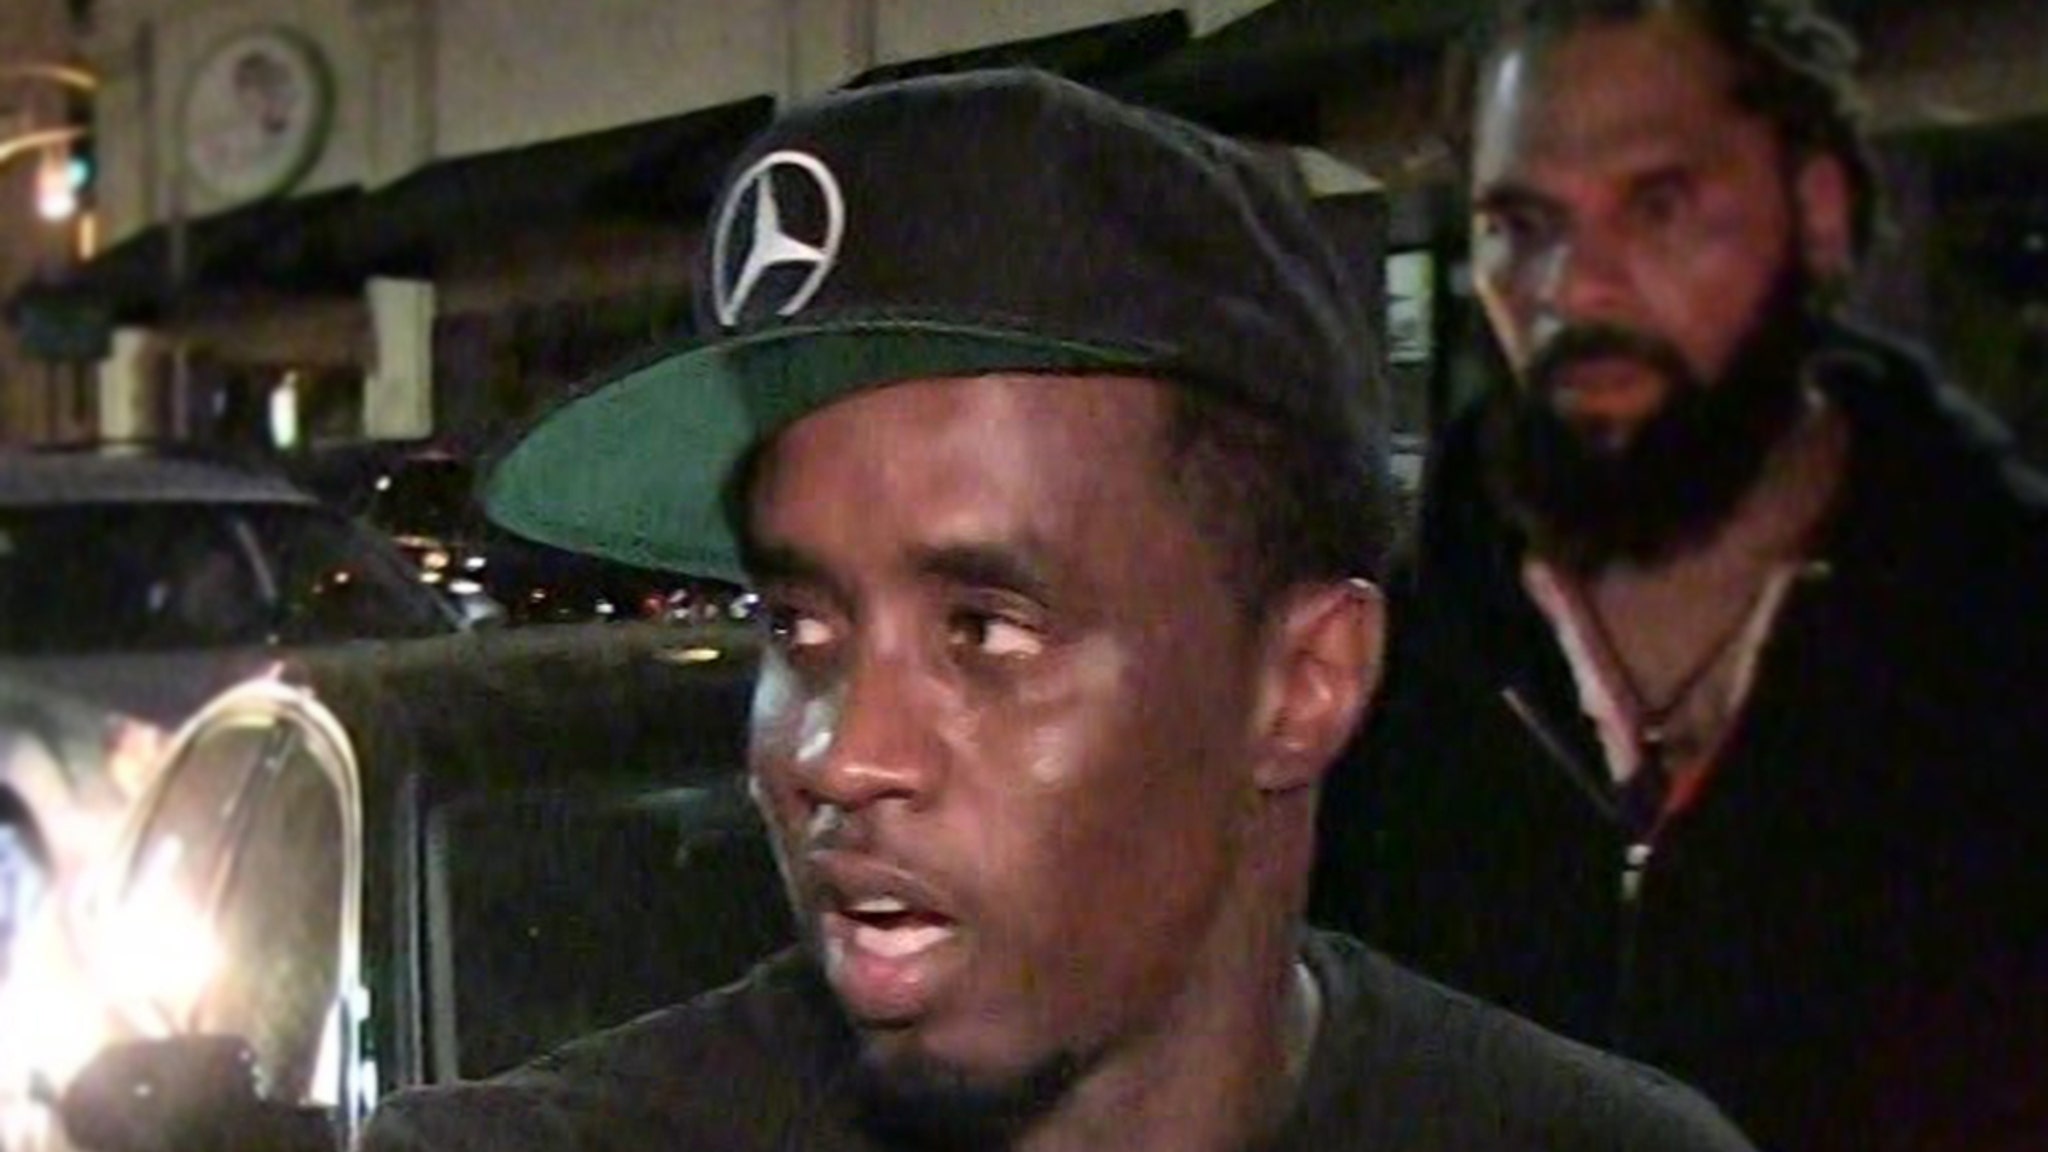 Diddy’s Home Crashed by Gate Hopper with Rap Dreams Arrested for Trespass – TMZ